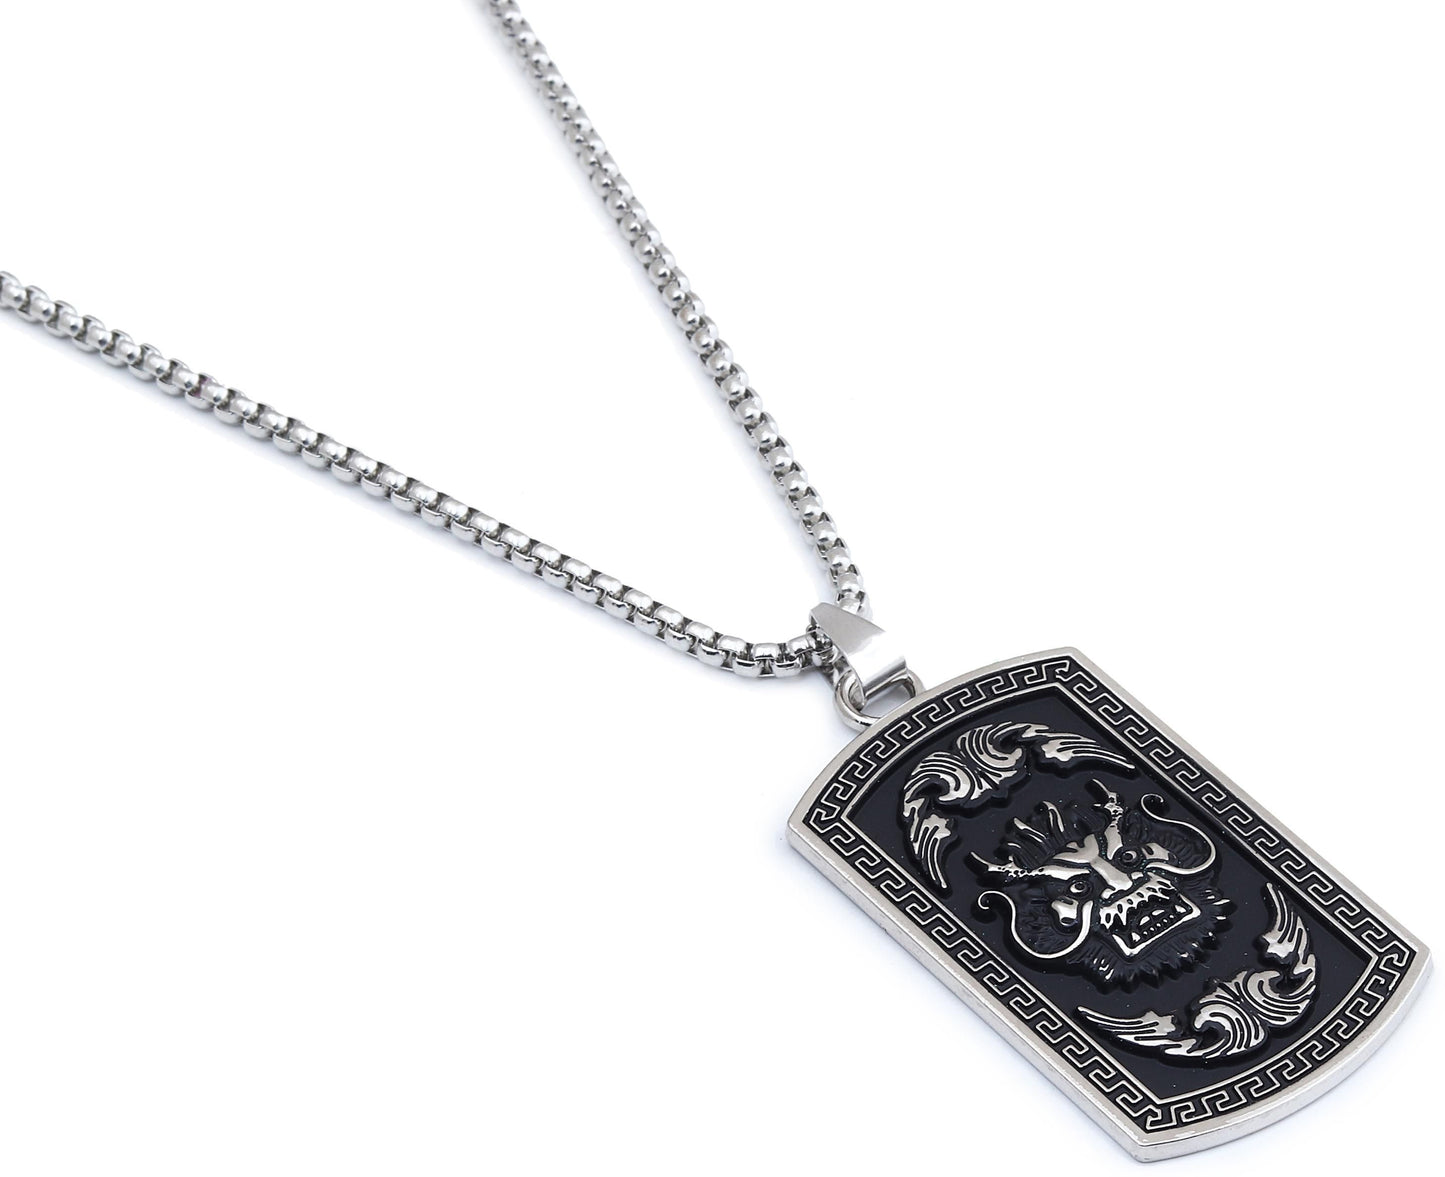 Fashion Frill Stainless Steel Silver Chain Pendant Fashionable For Men